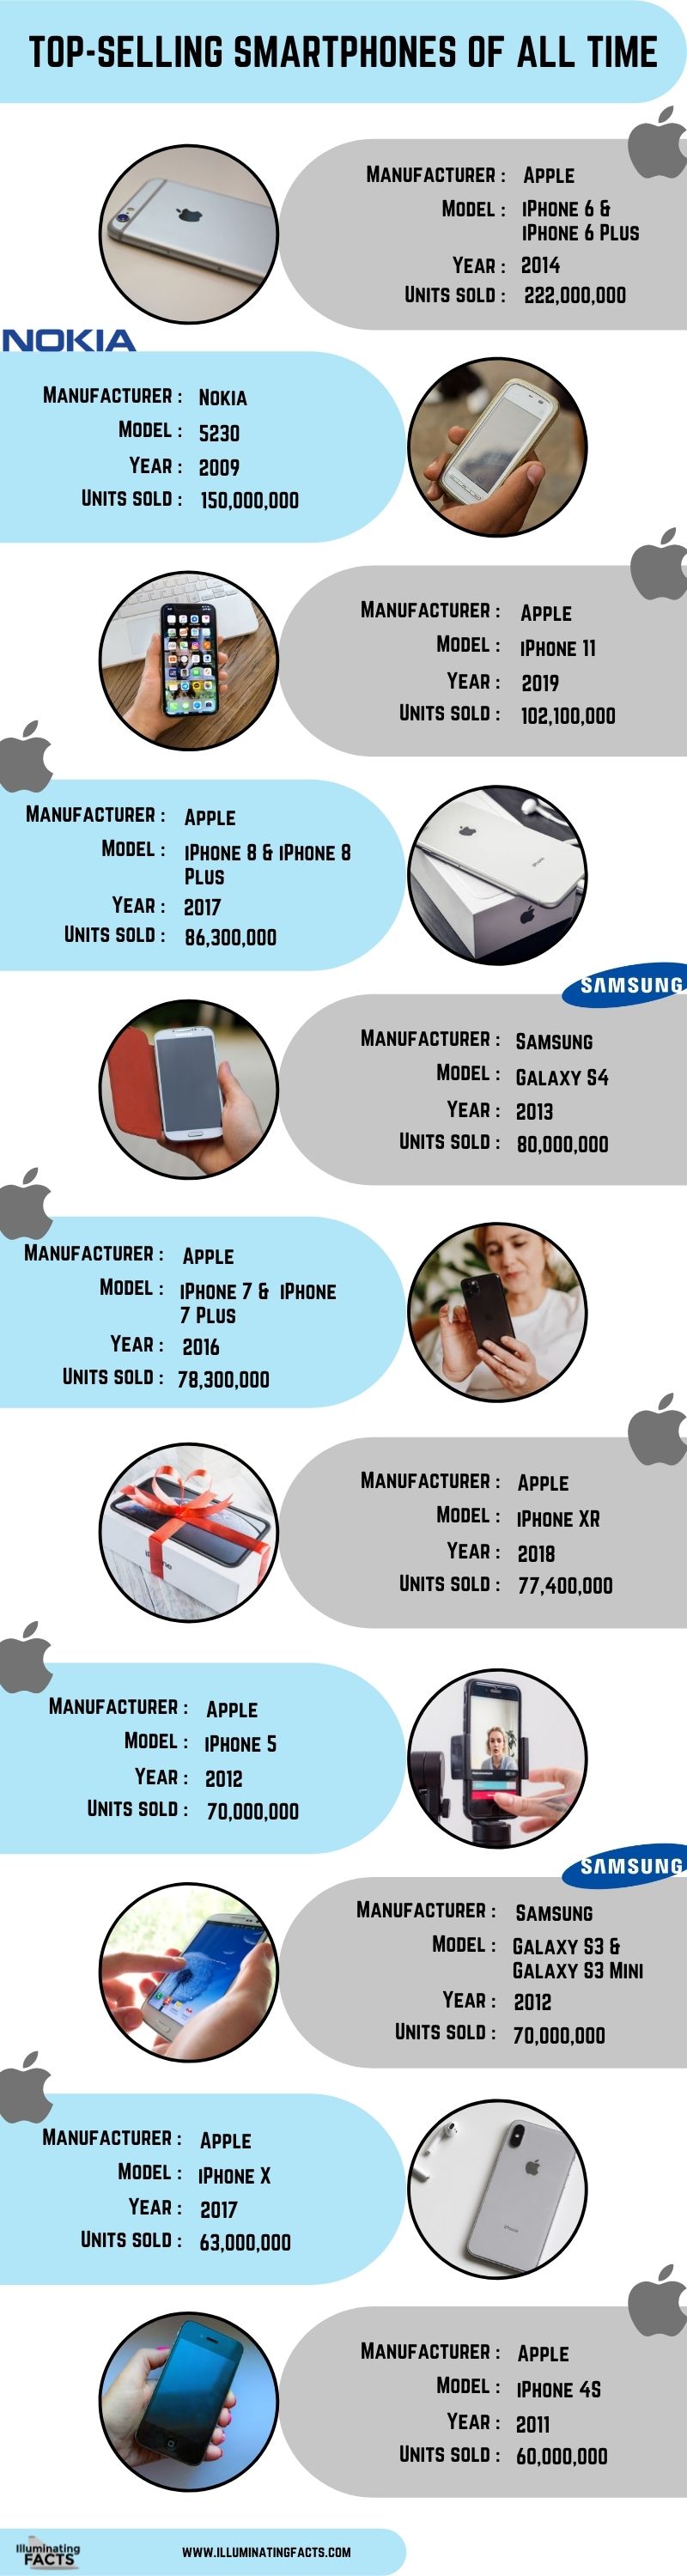 Top-selling smartphones of all time Infographic